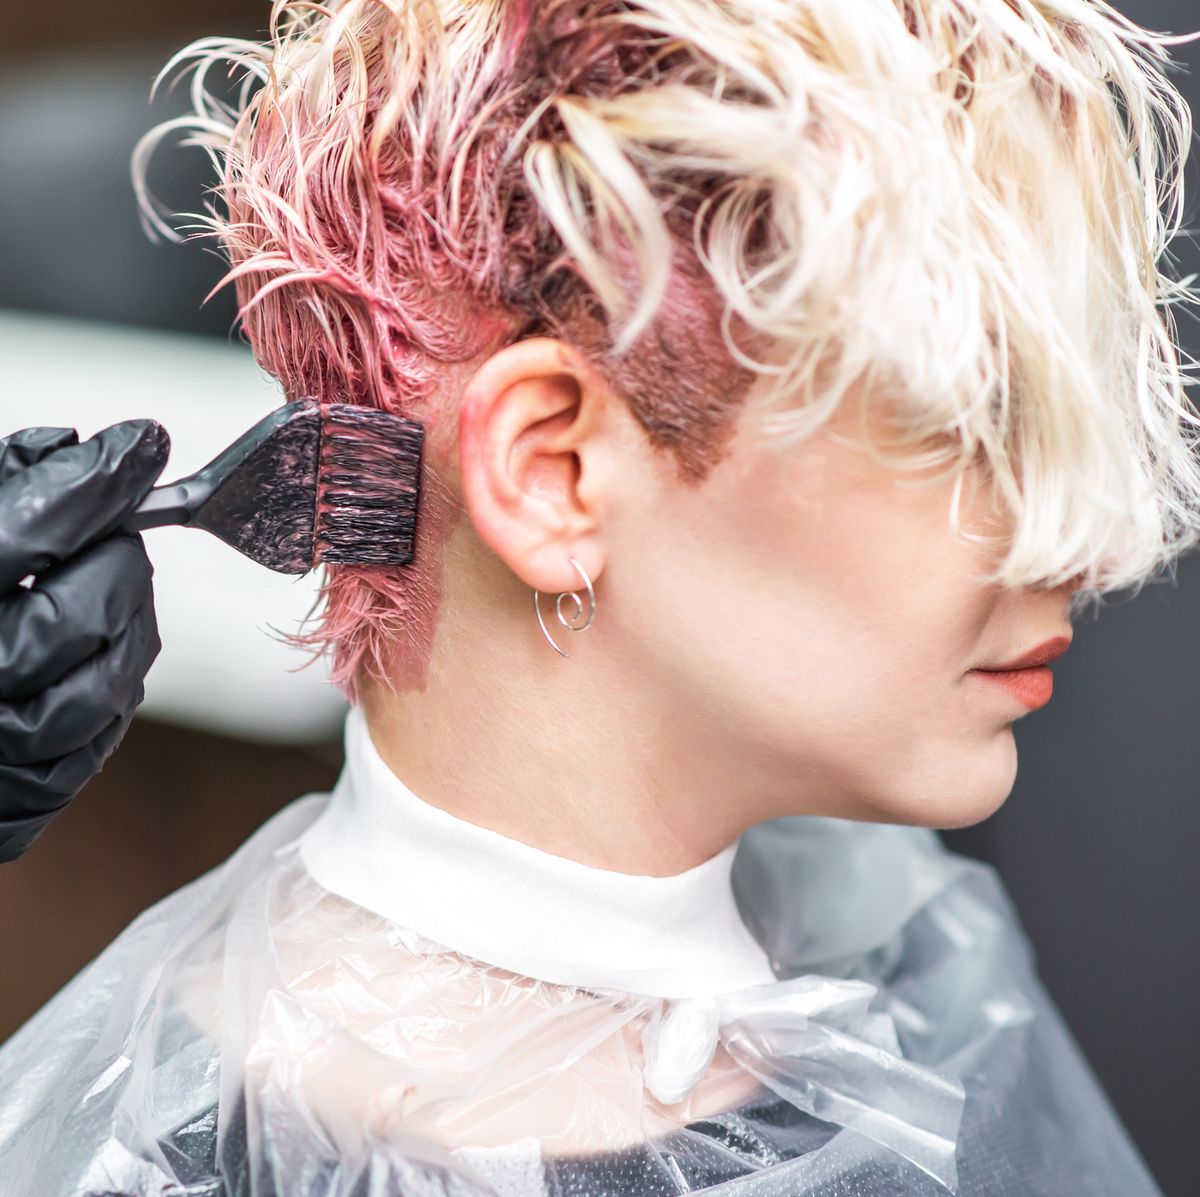 Hairdresser hand in black gloves paints the woman's hair in a pink color.